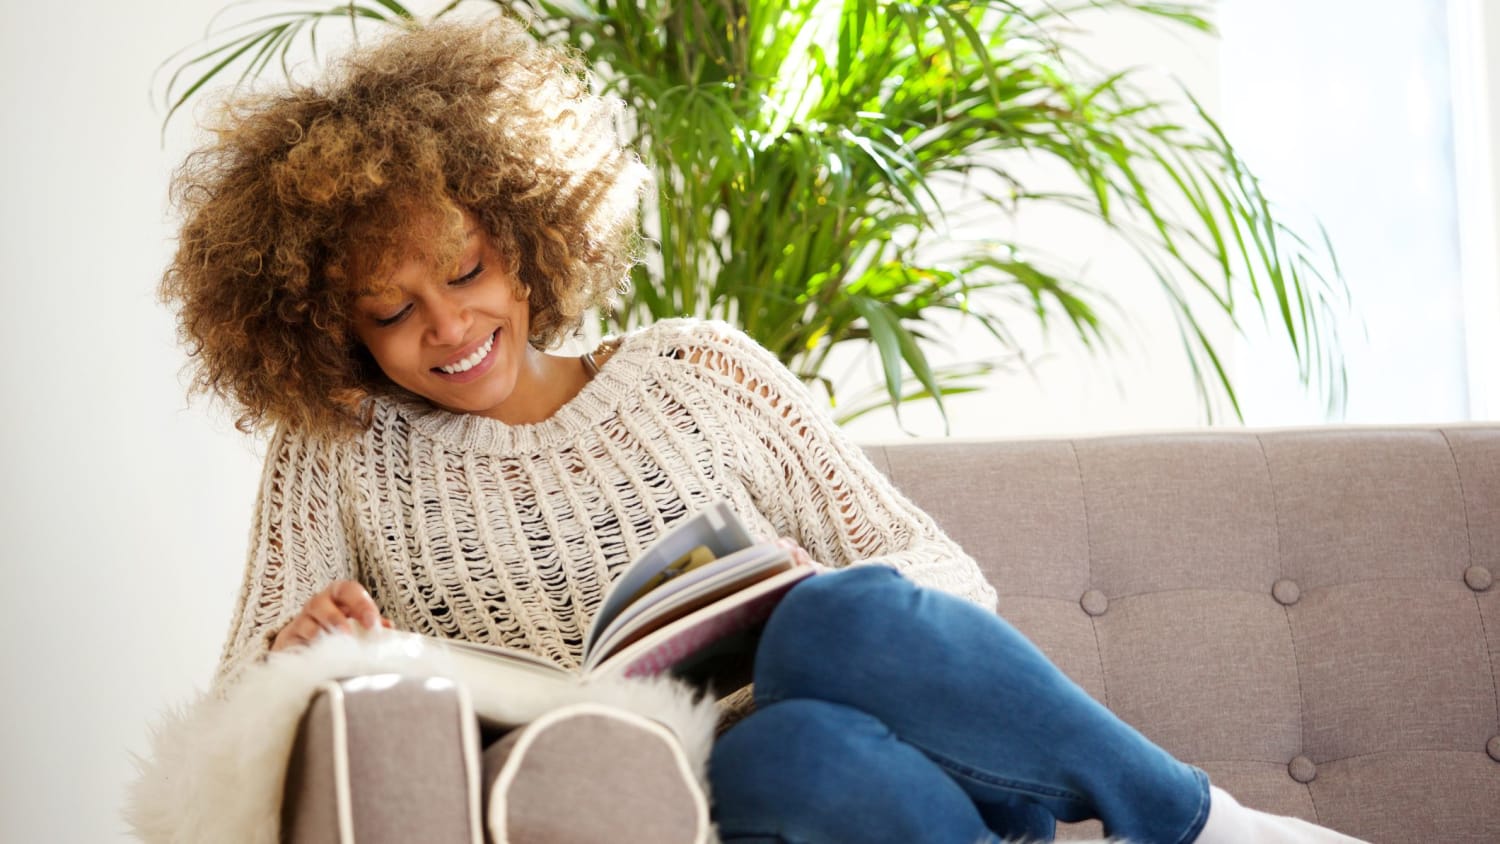 Reading Makes People Feel Happier and Smarter, According to New Poll